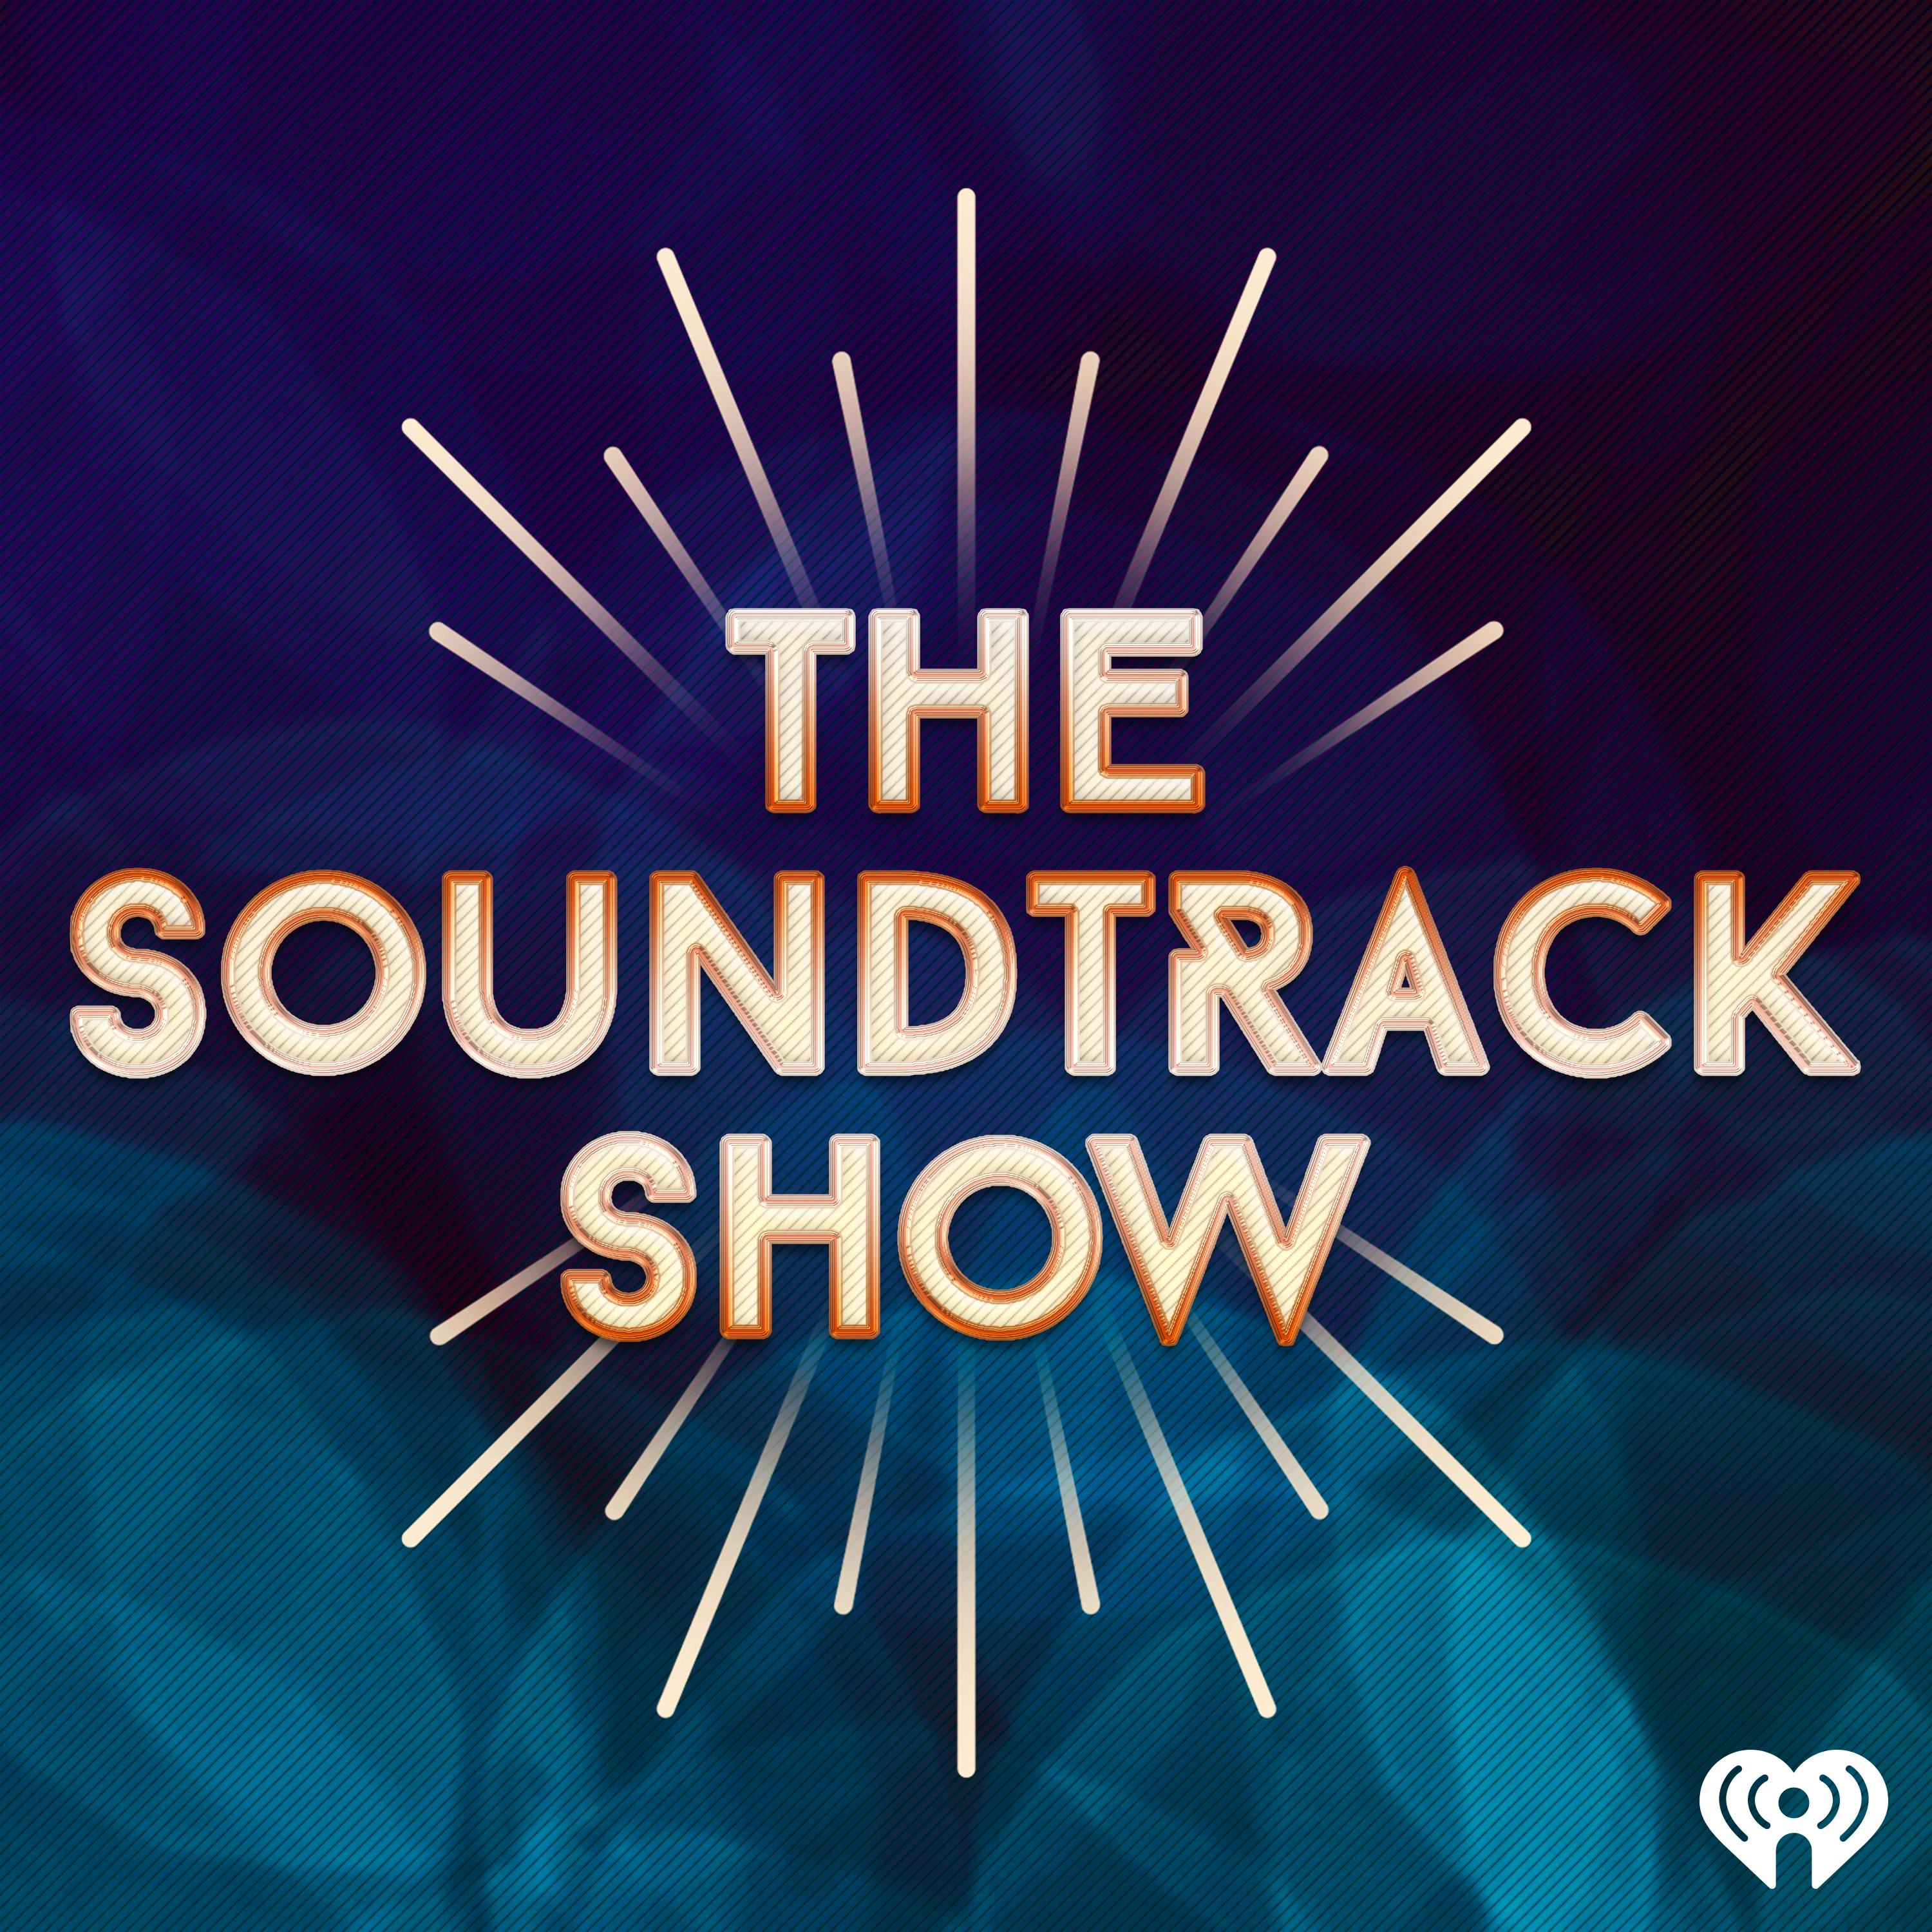 The Soundtrack Show podcast